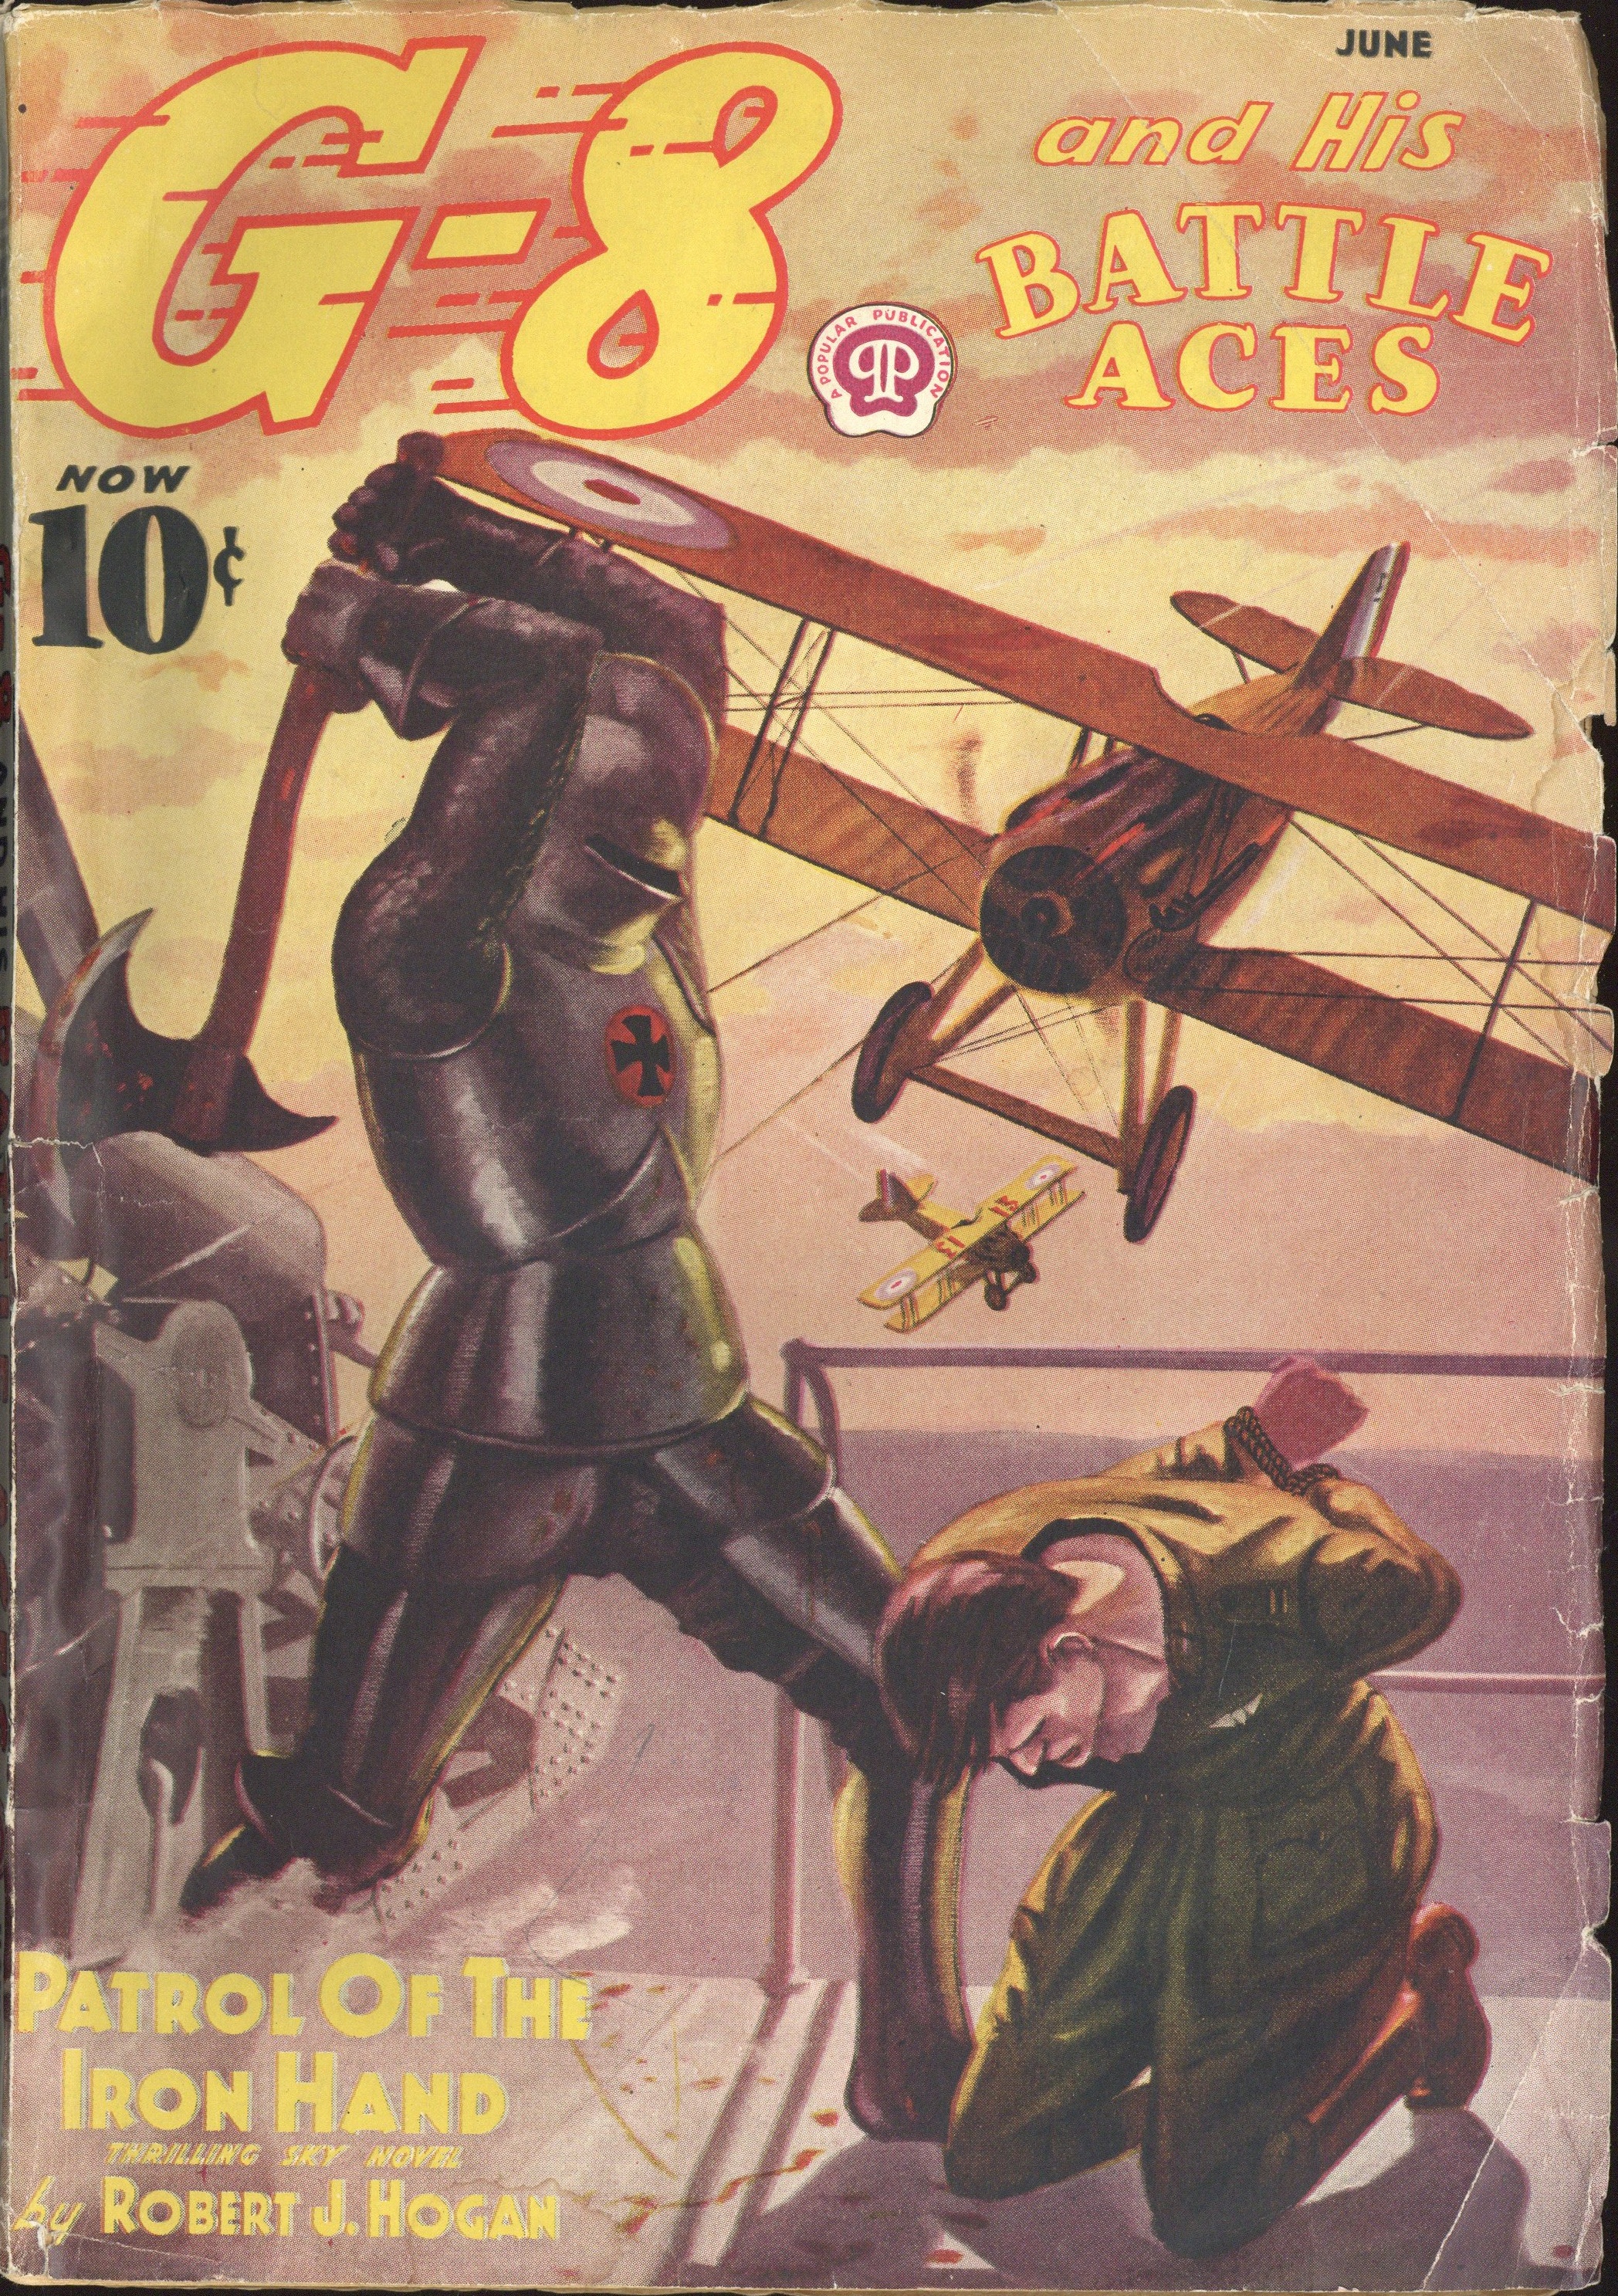 G-8 and His Battle Aces June 1938